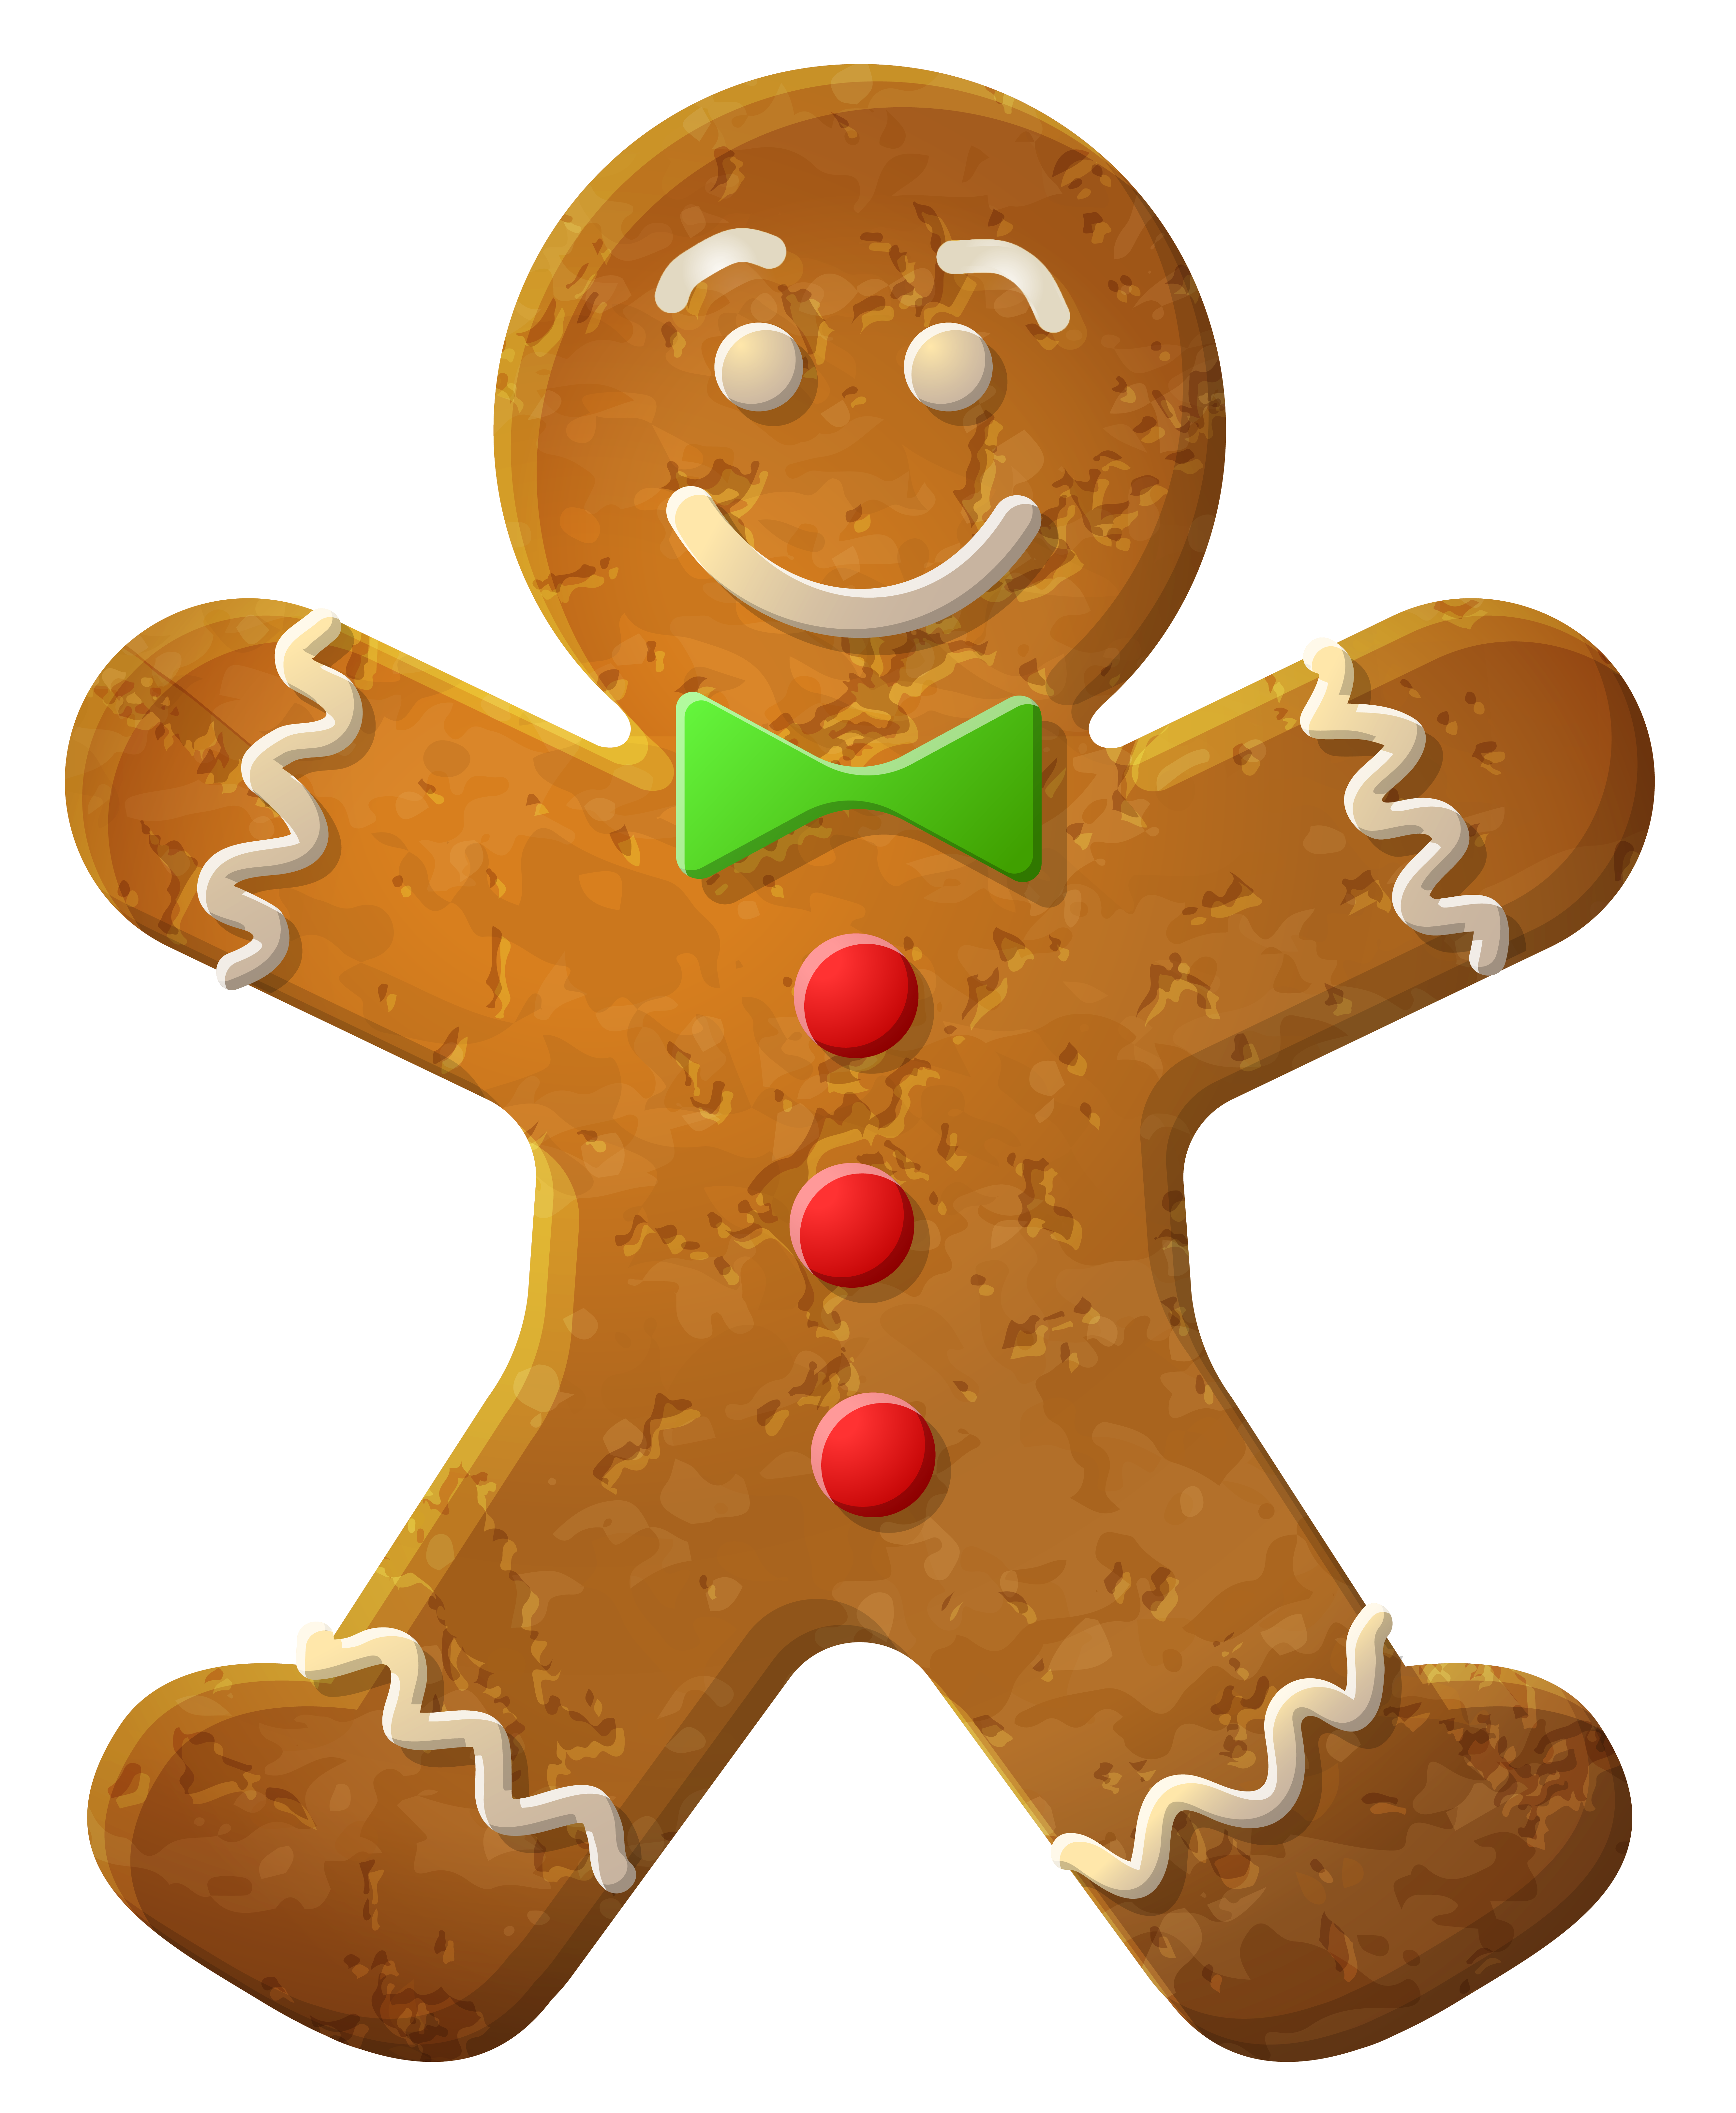 Gingerbread man silhouette at. Lobster clipart plate clipart